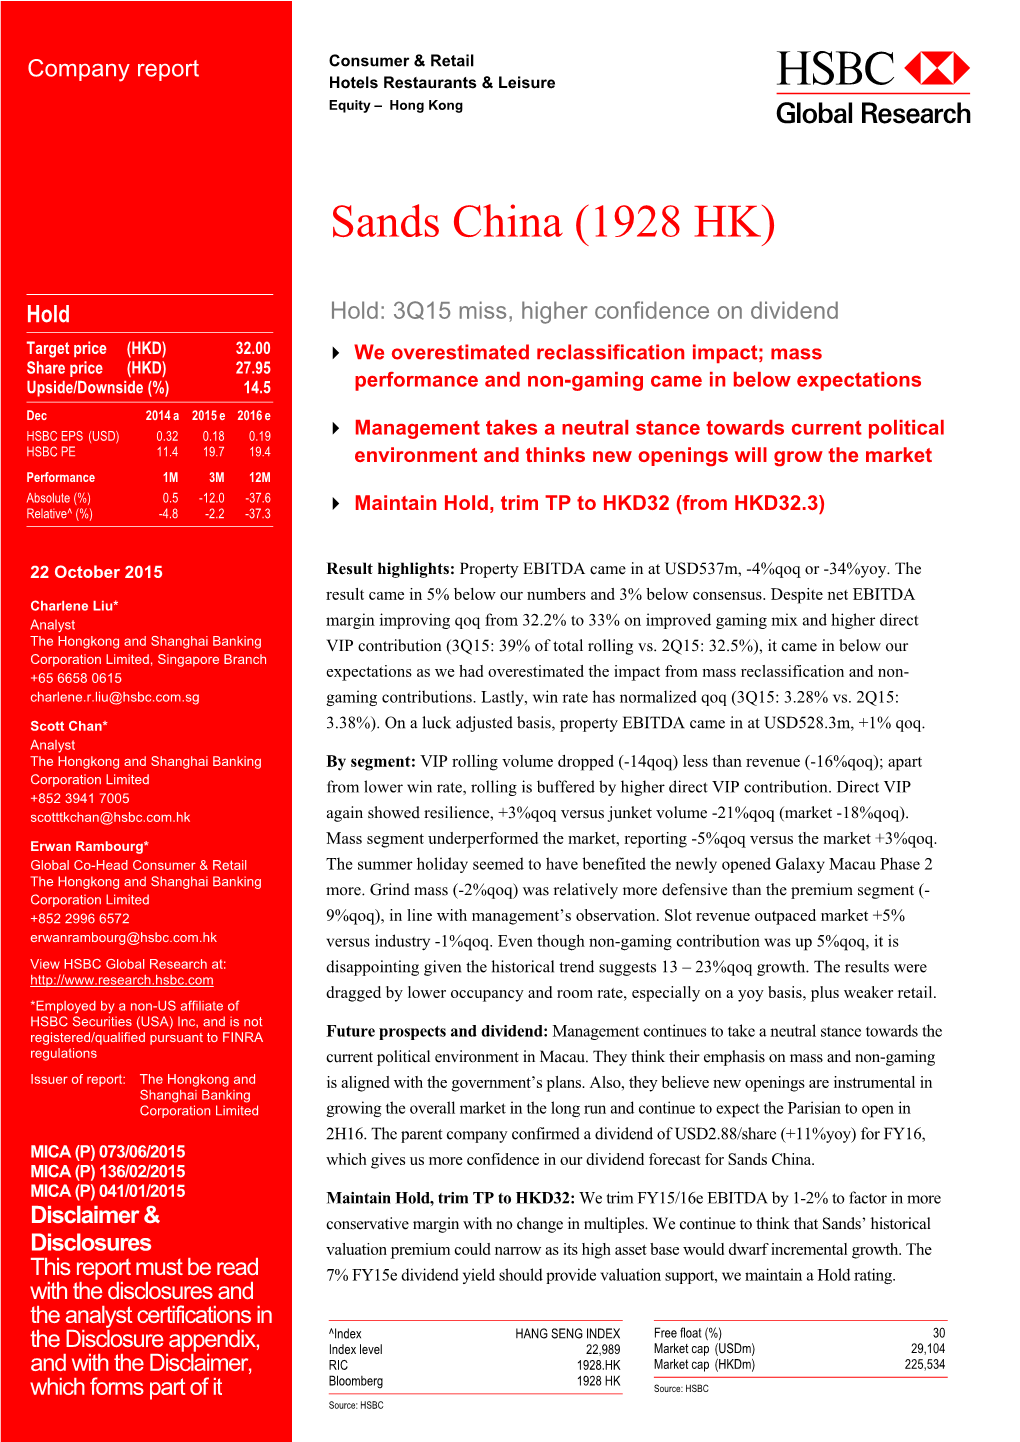 Sands China (1928 HK)-Hold: 3Q15 Miss, Higher Confidence On